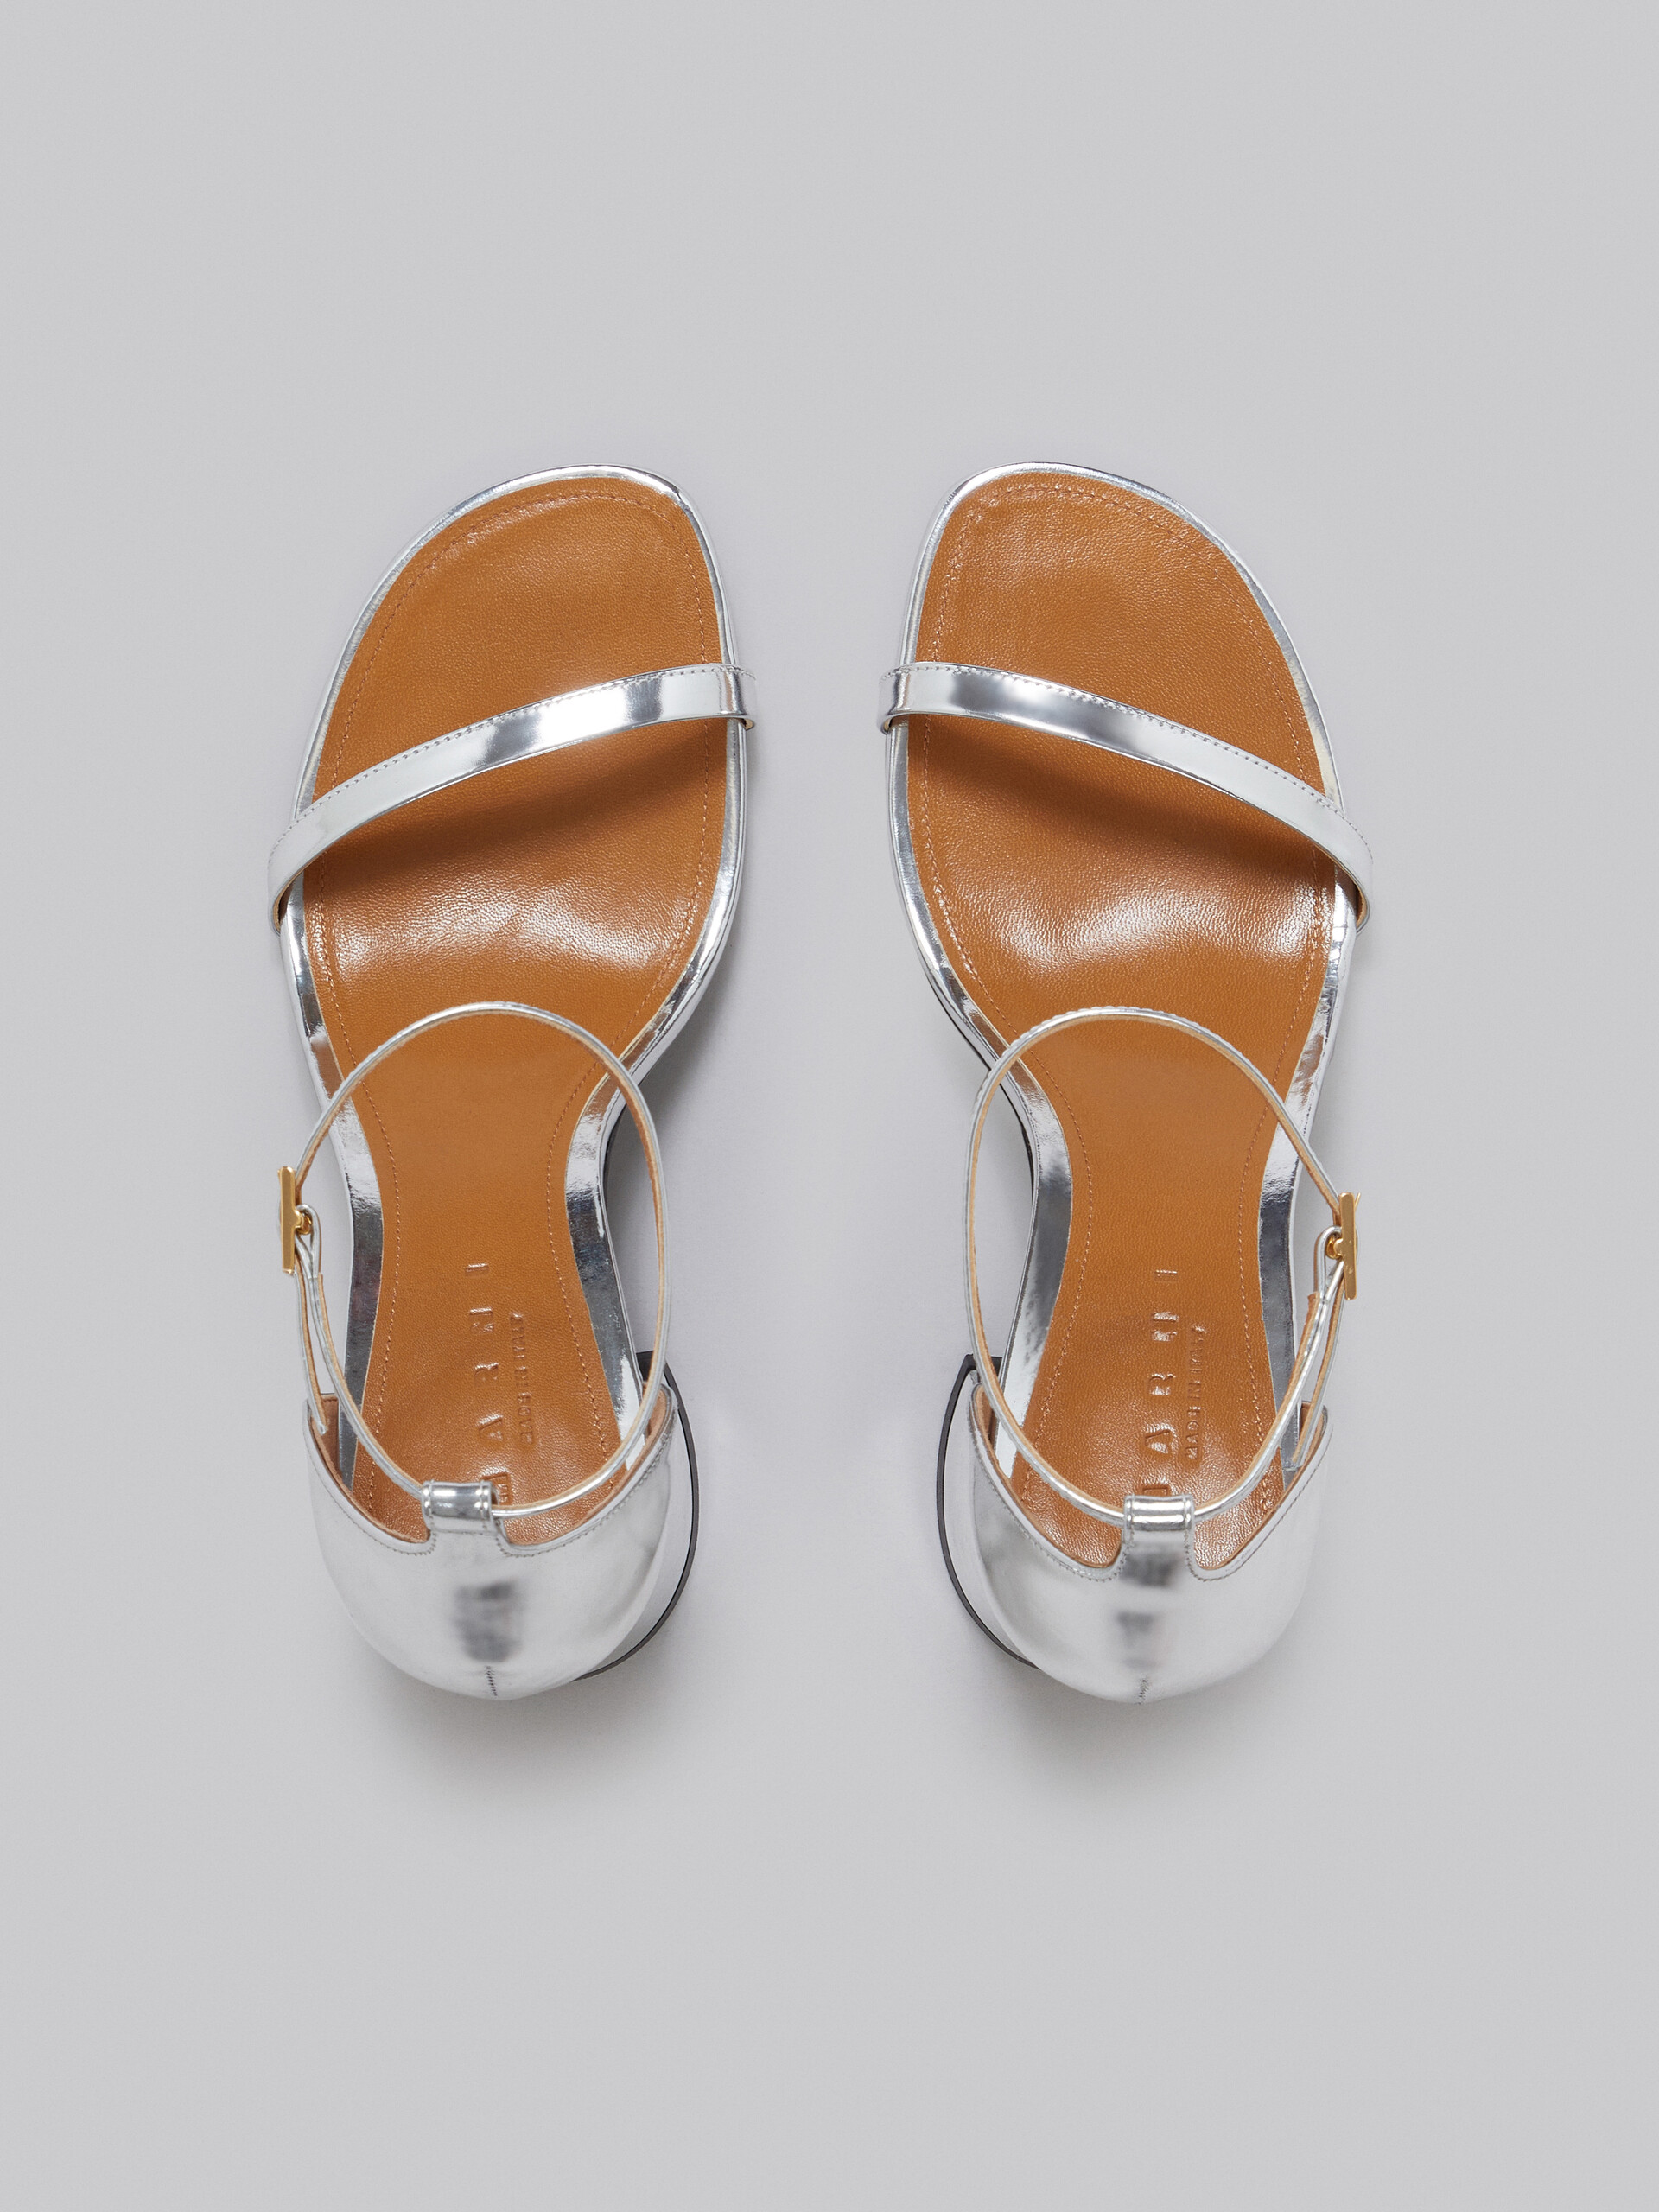 Silver mirrored leather sandal - Sandals - Image 4